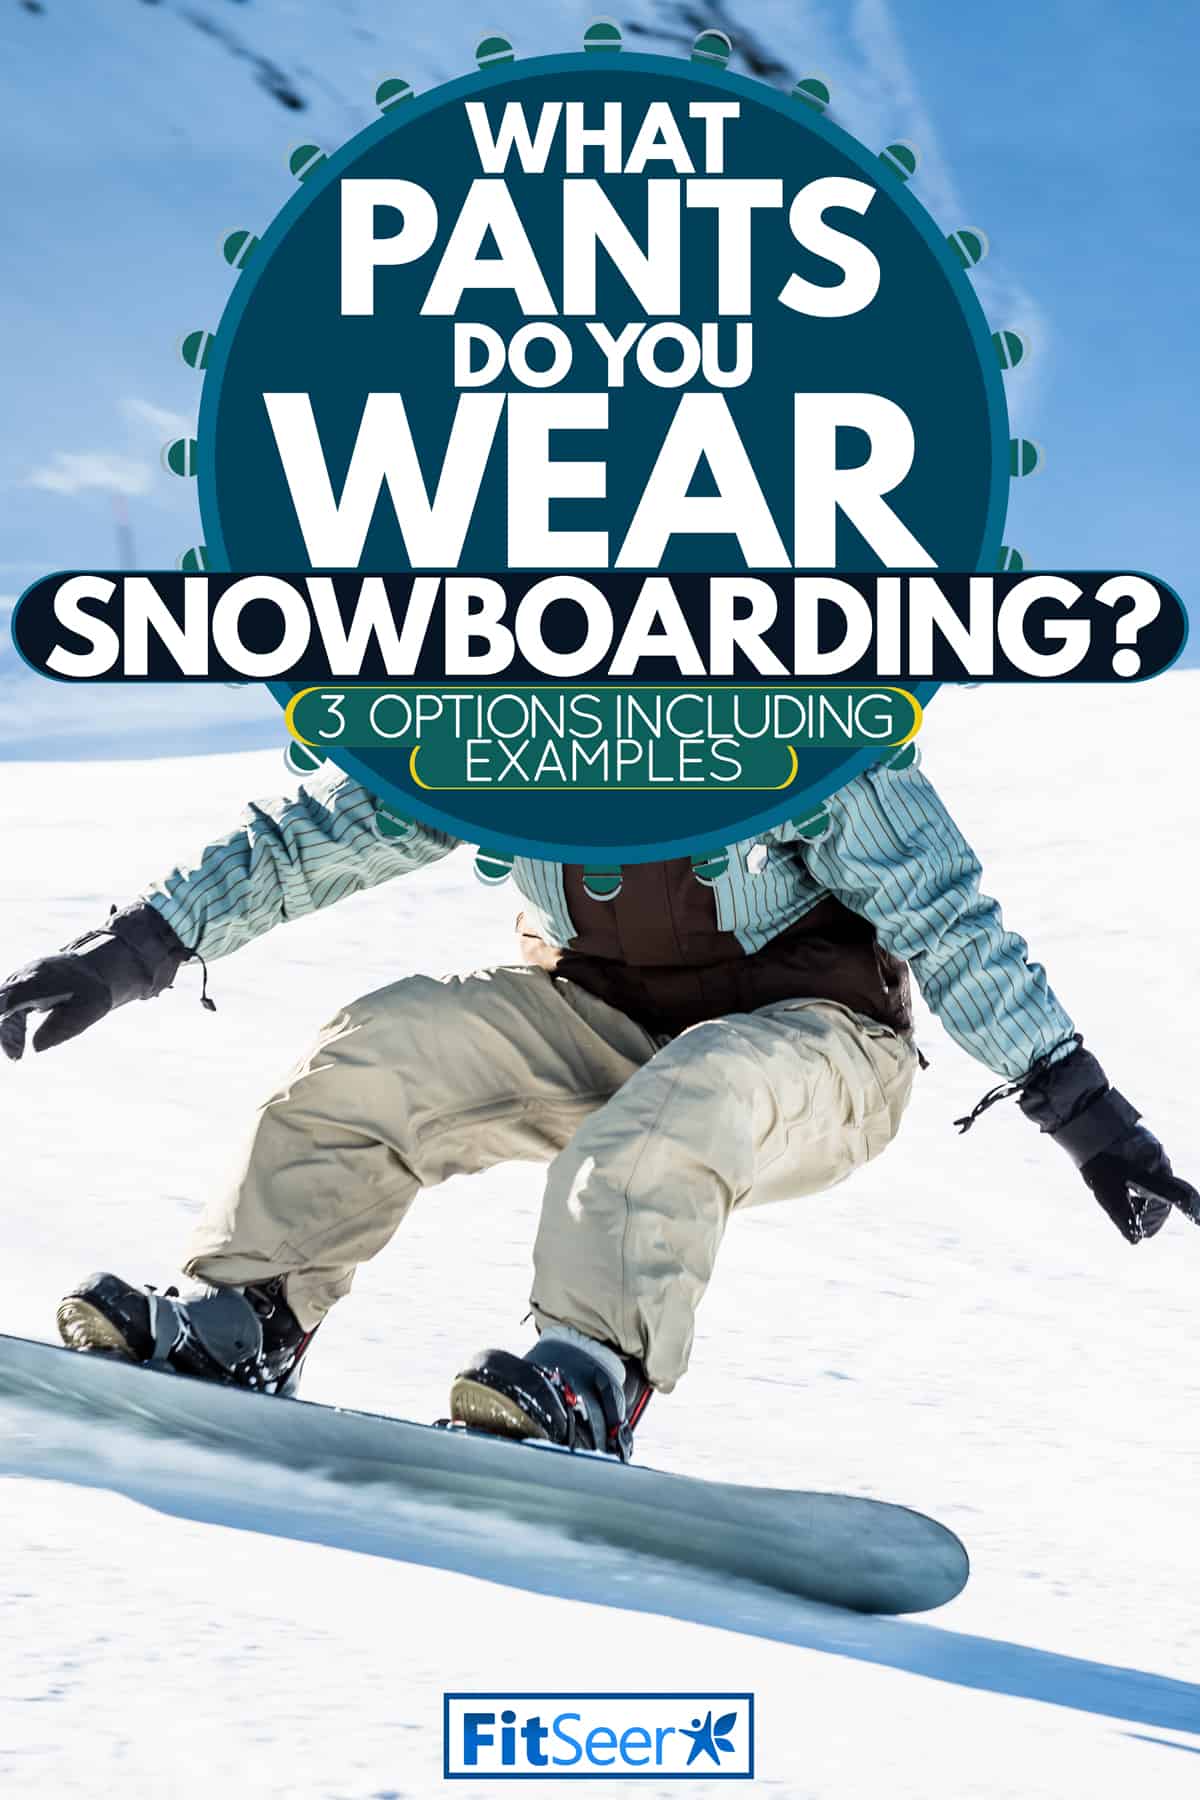 A fully geared snowboarder with a gradient colored goggles trekking on the snowy trails of a mountain side, What Pants Do You Wear Snowboarding? [3 Options inc. examples]